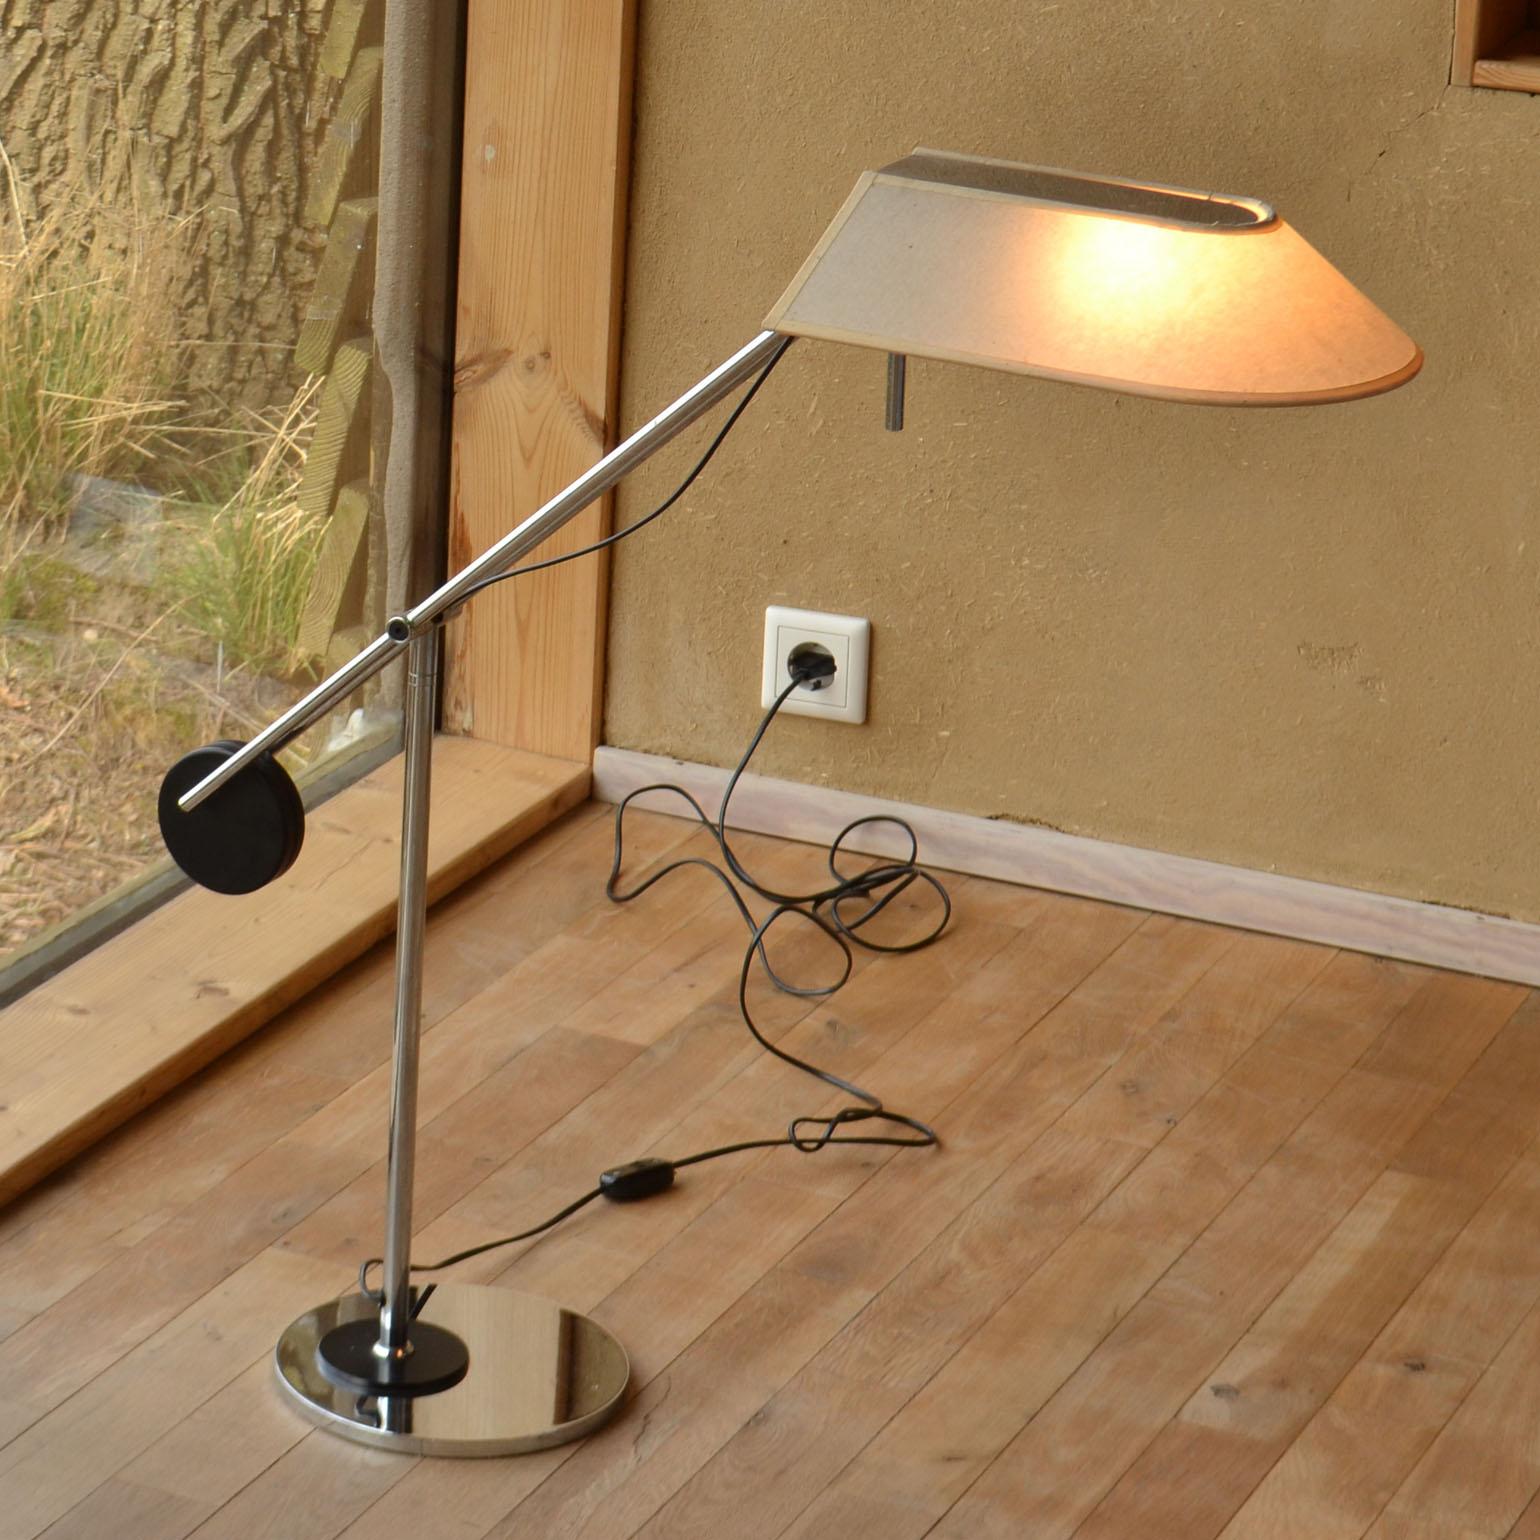 Minimalist Black and Chrome Table Lamp, Counter Balance Swiss 1970's For Sale 6